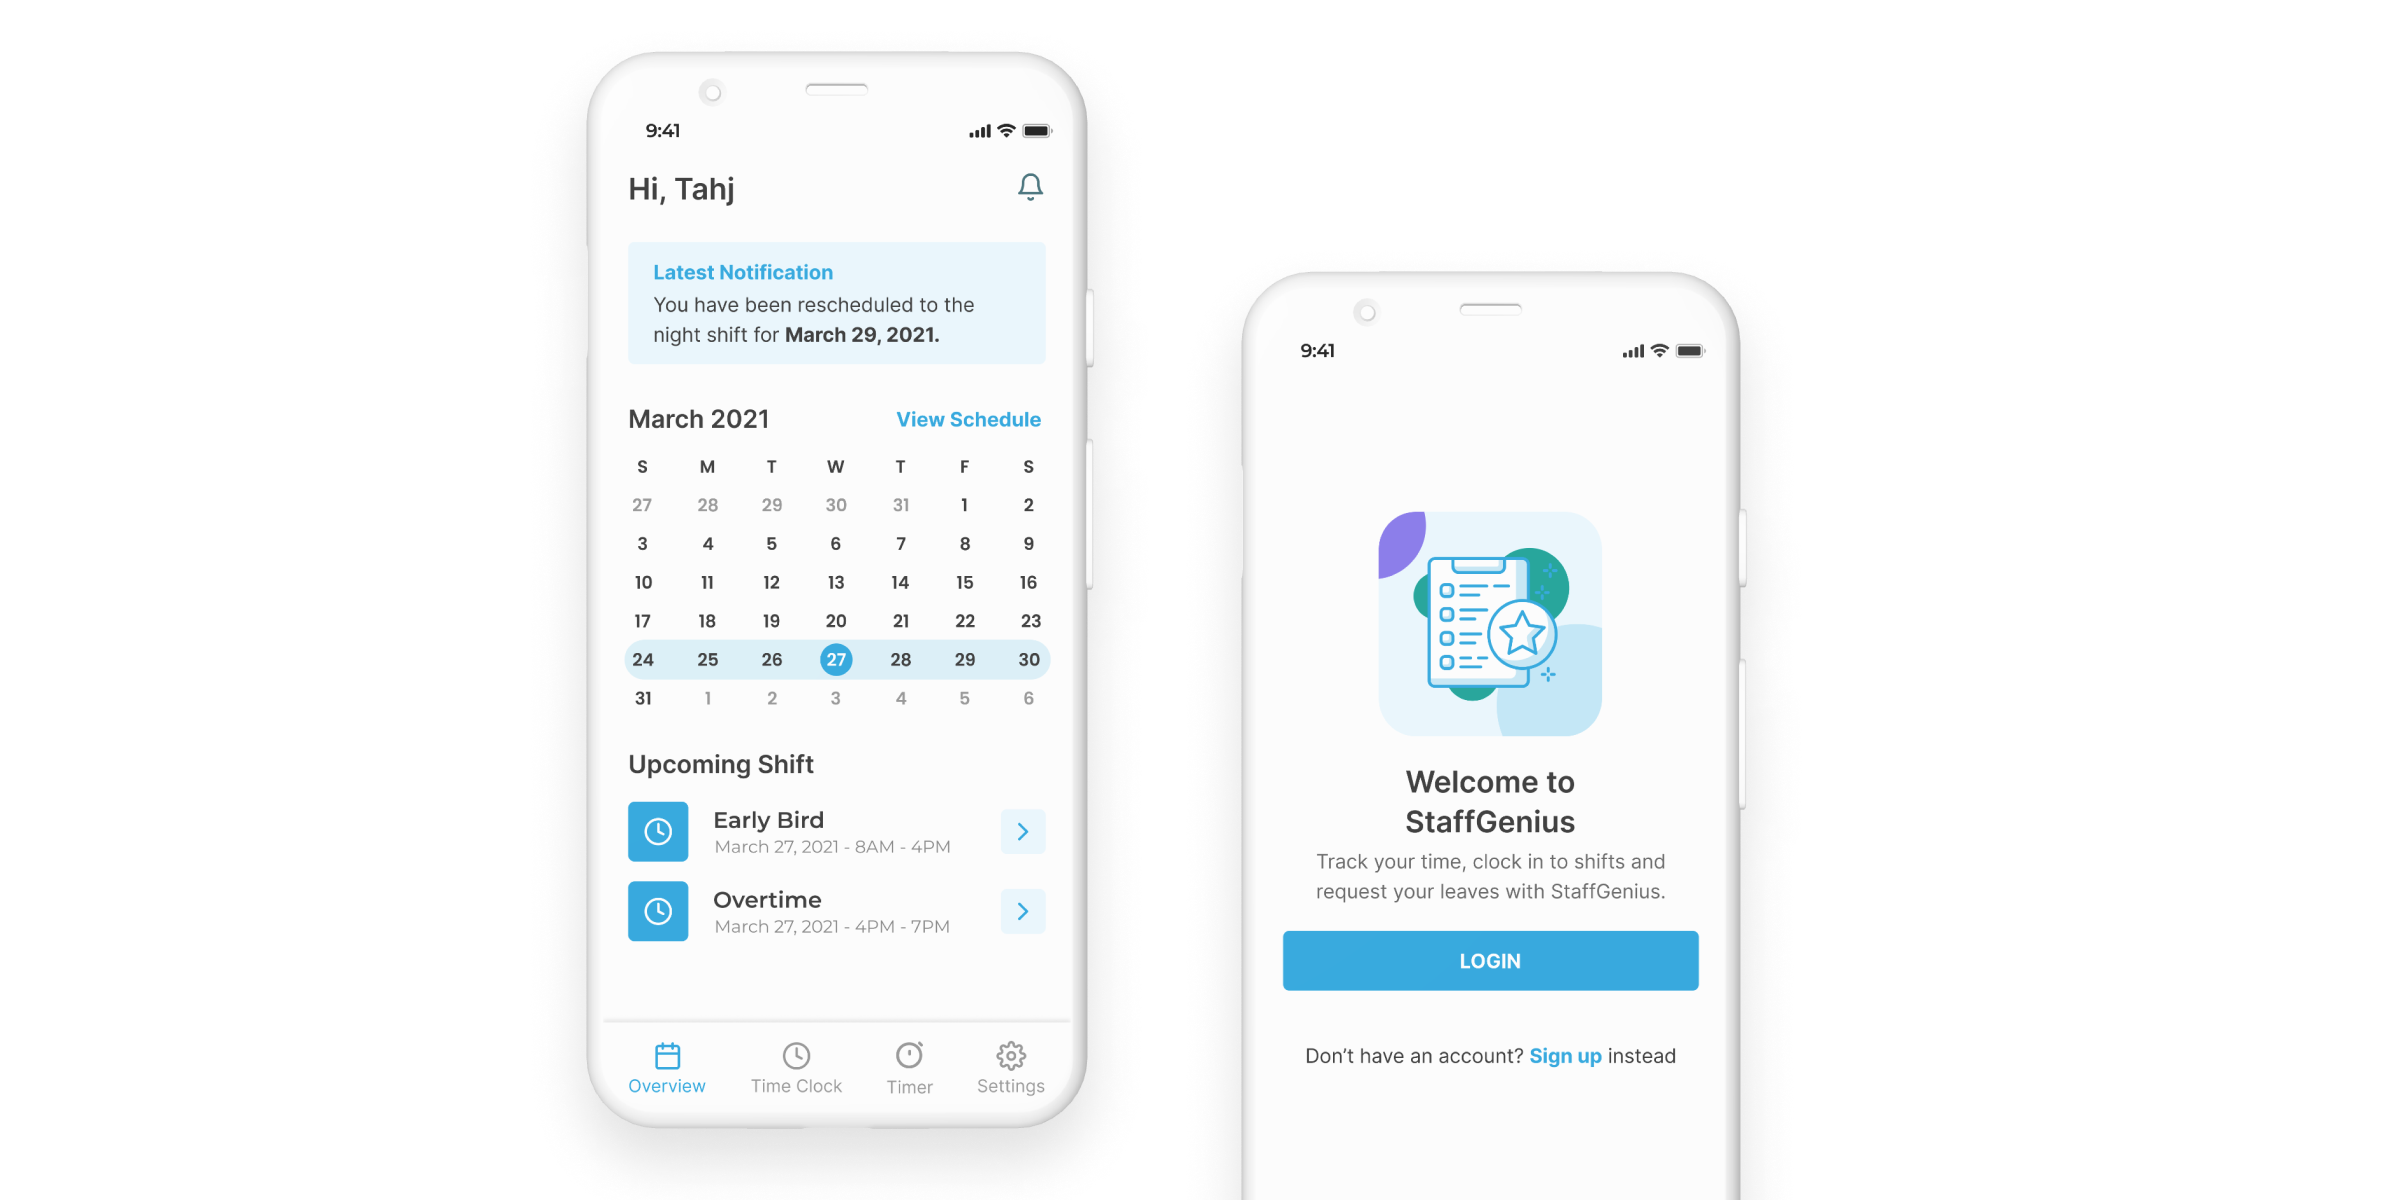 Mockups showing the homescreen and login screen of Staff Genius